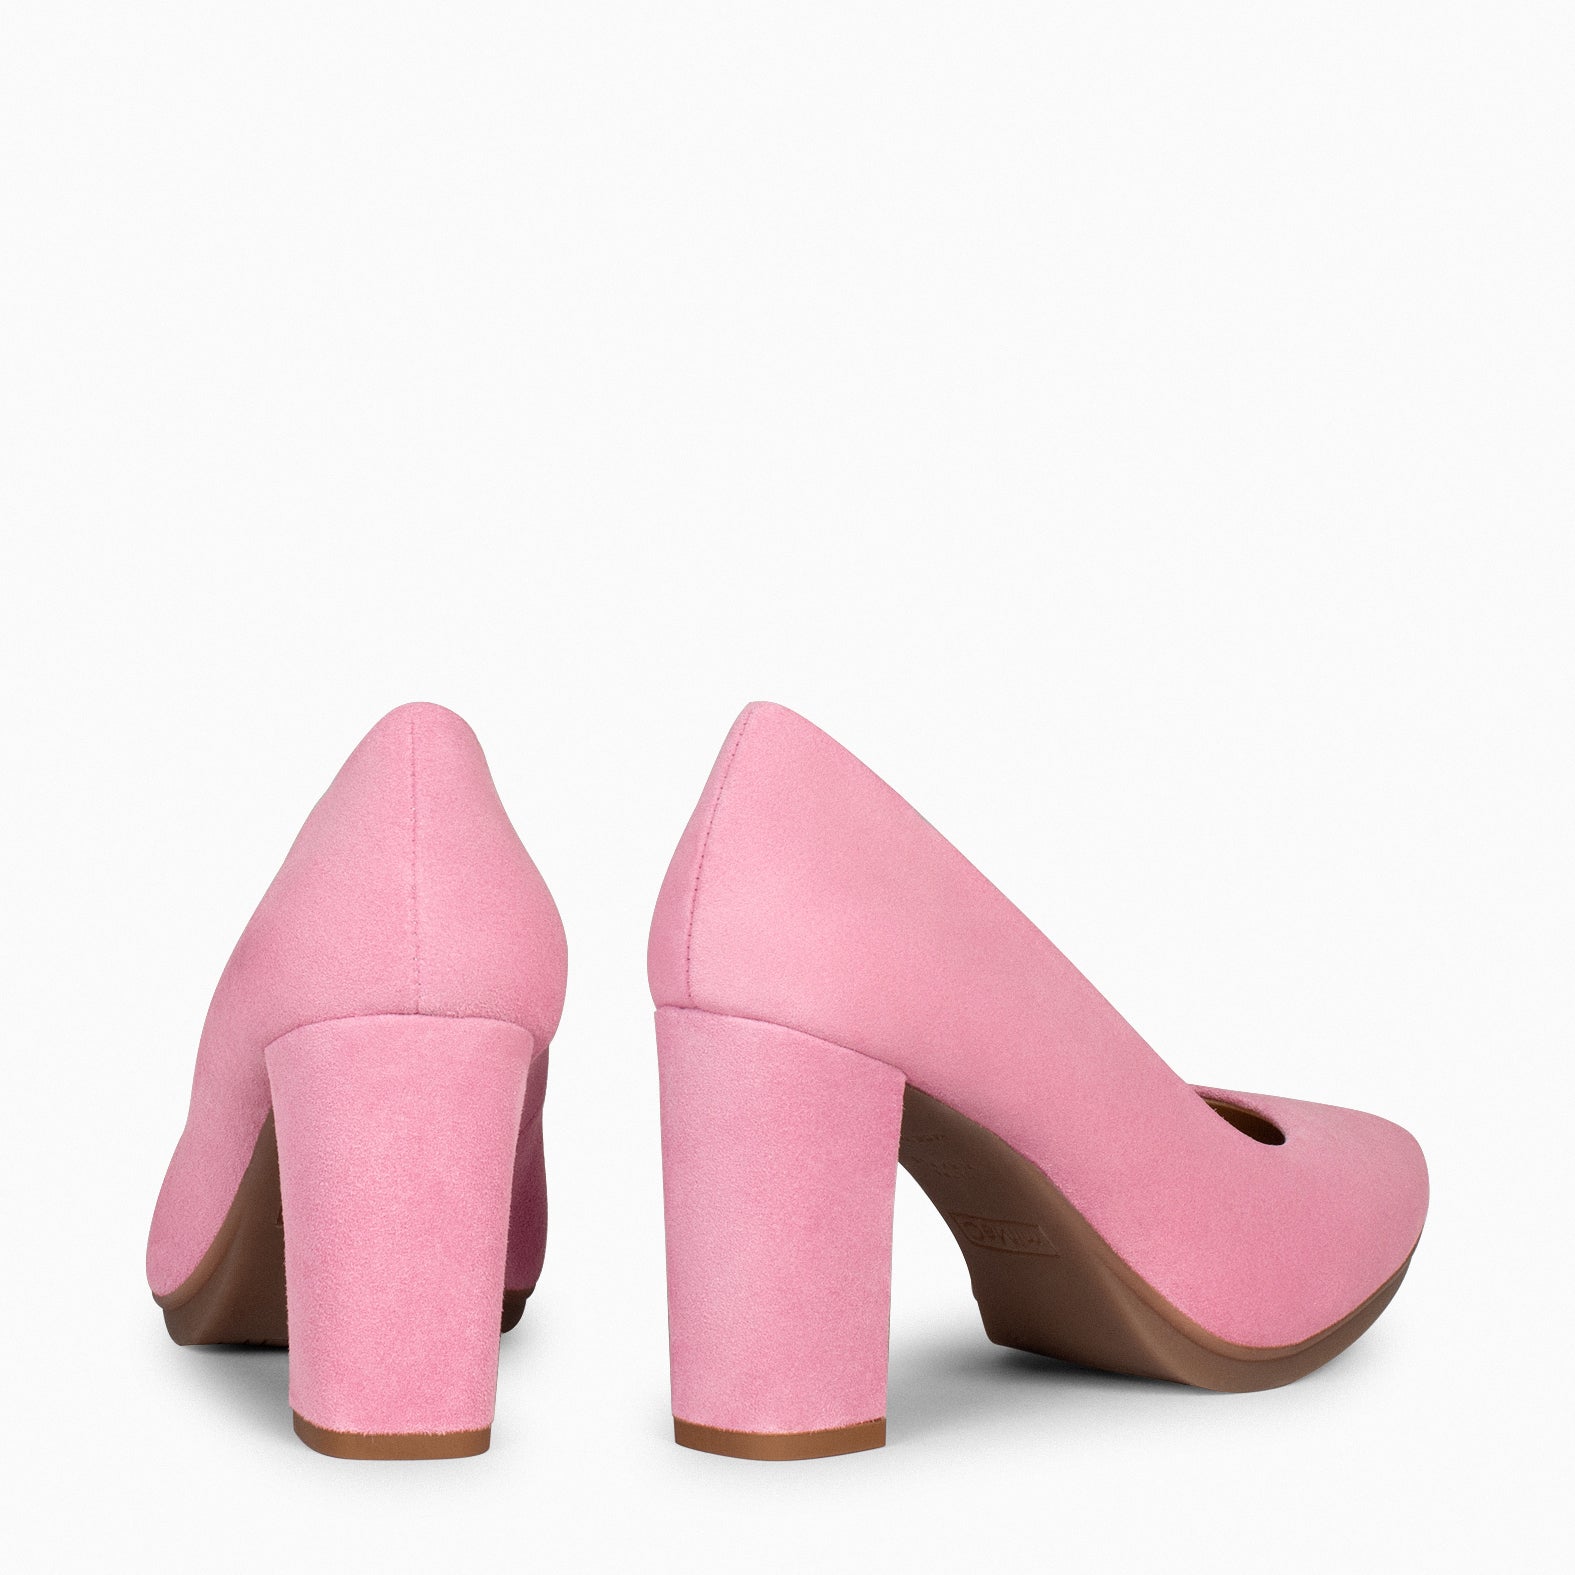 URBAN – PALE PINK Suede high-heeled shoes 